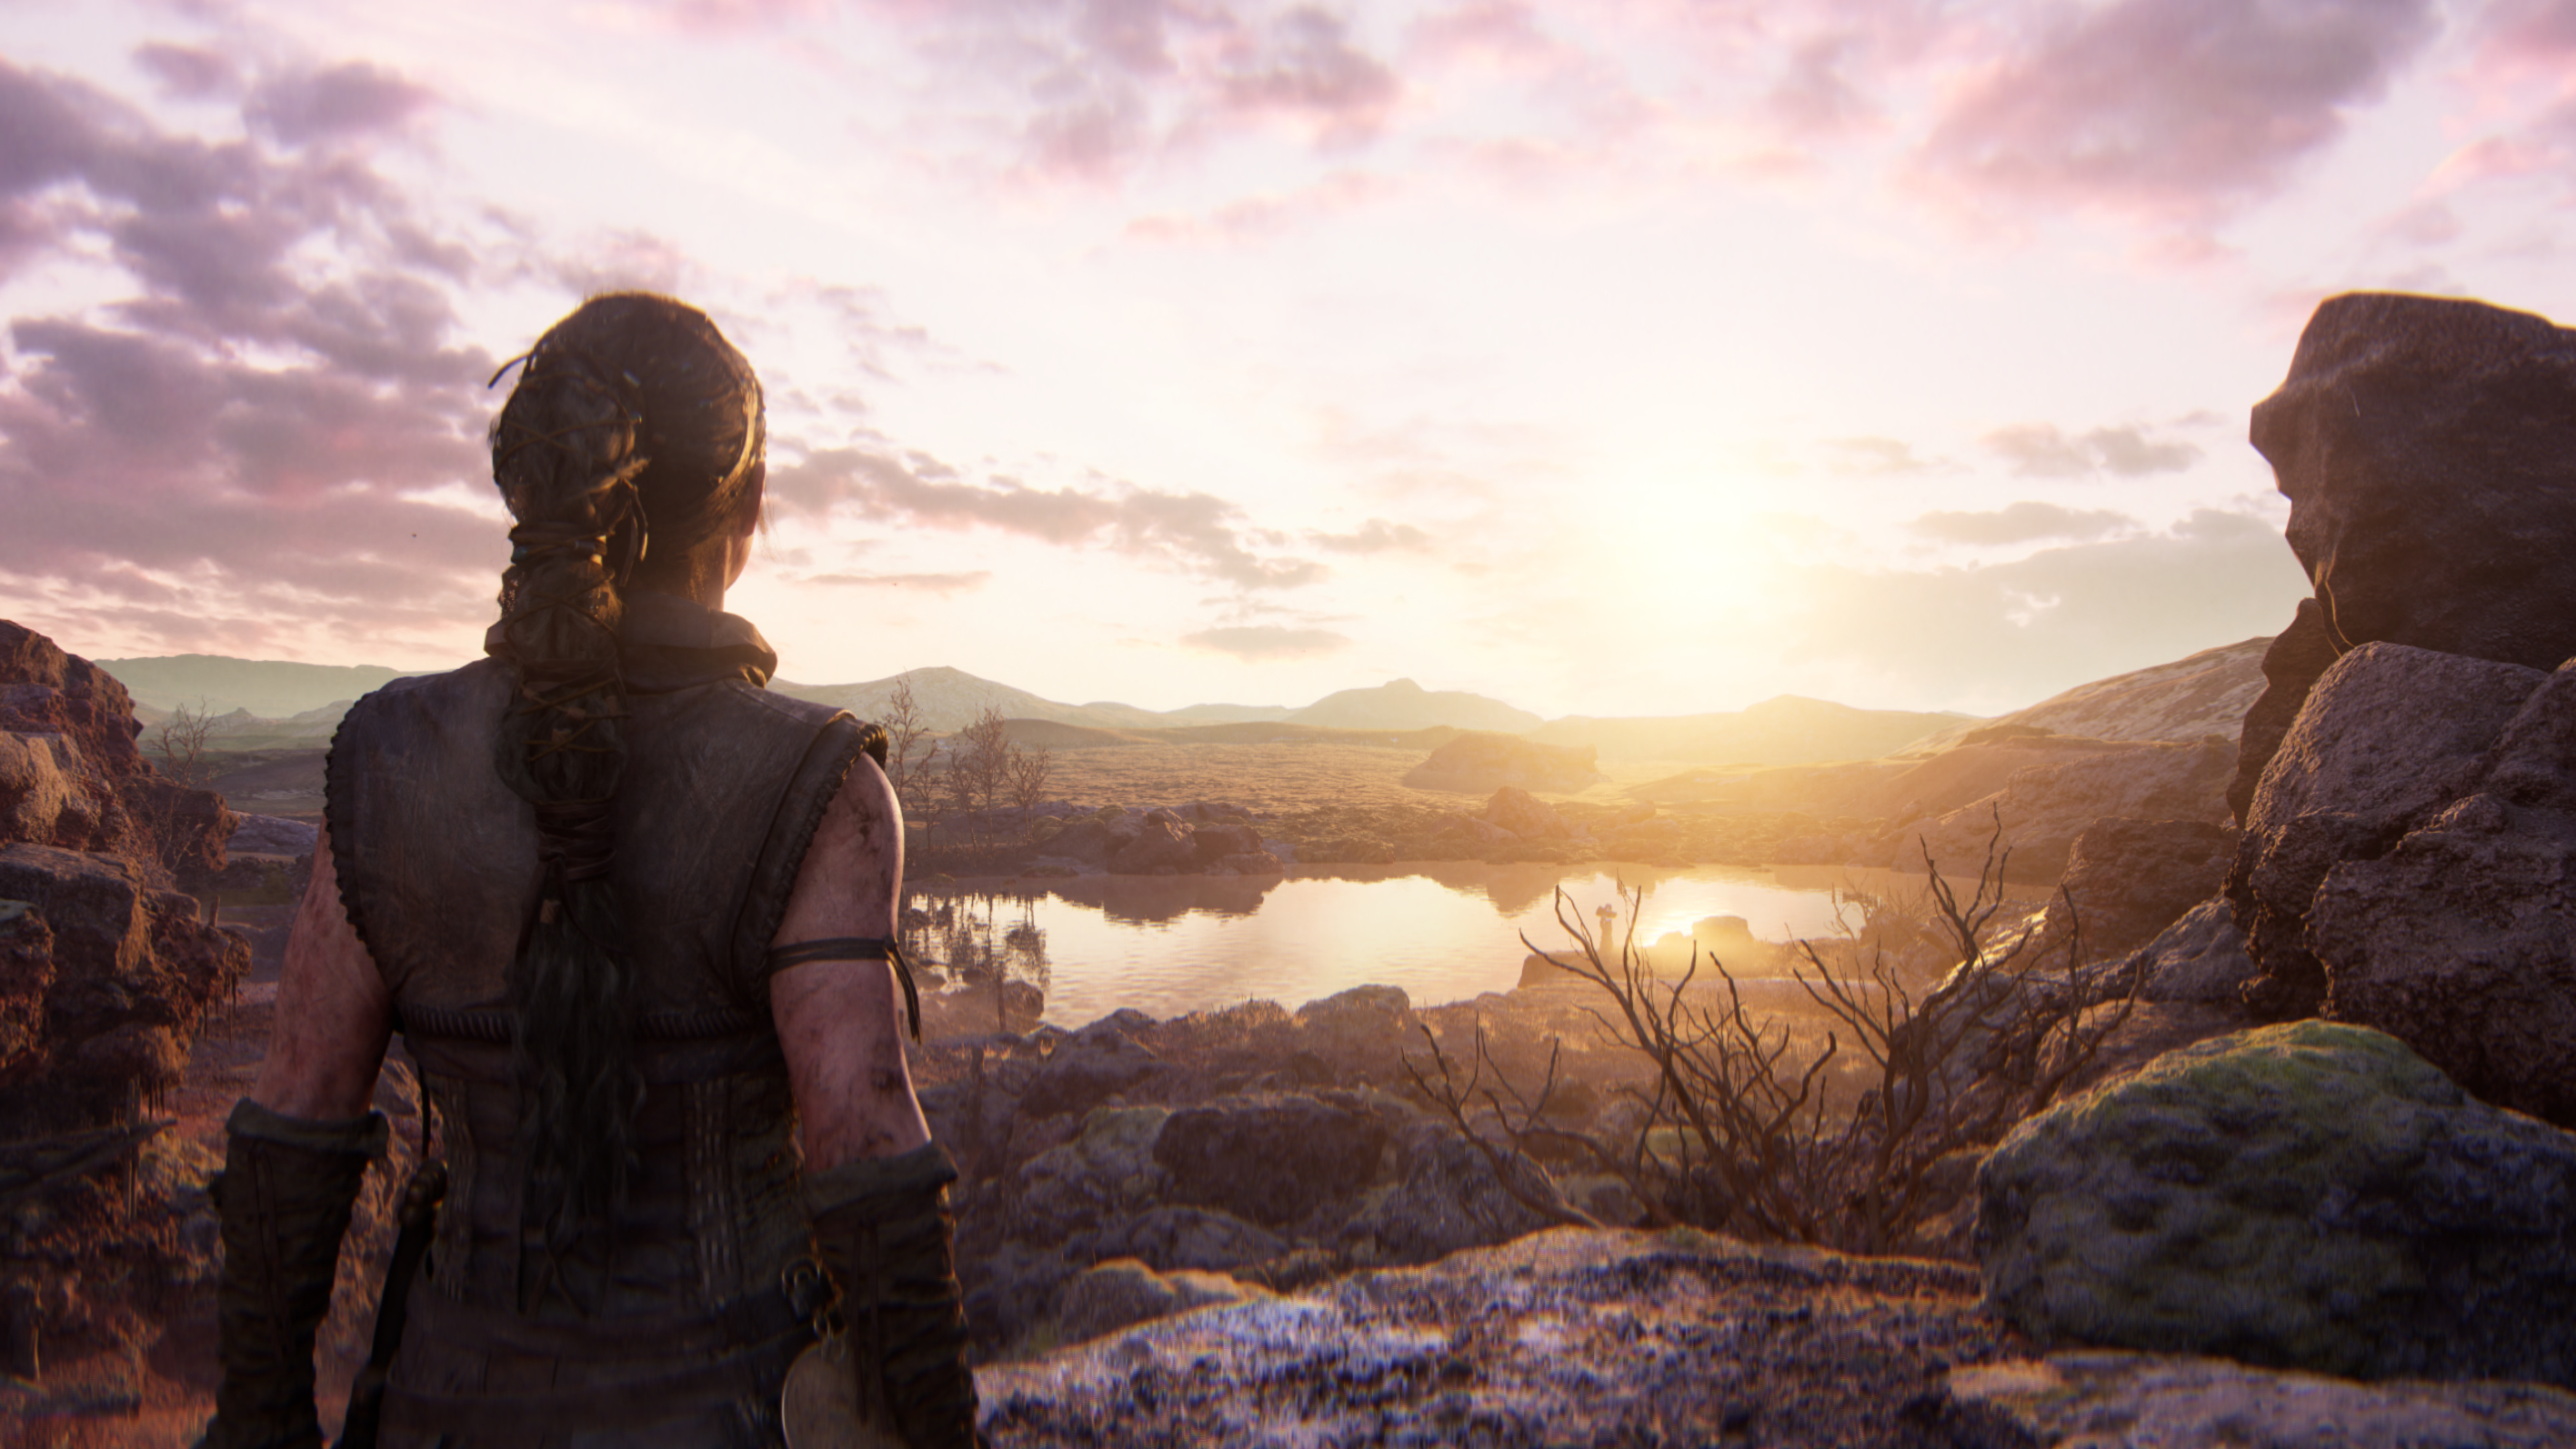 A landscape vista with lake and sunset in Senuas Saga Hellblade 2